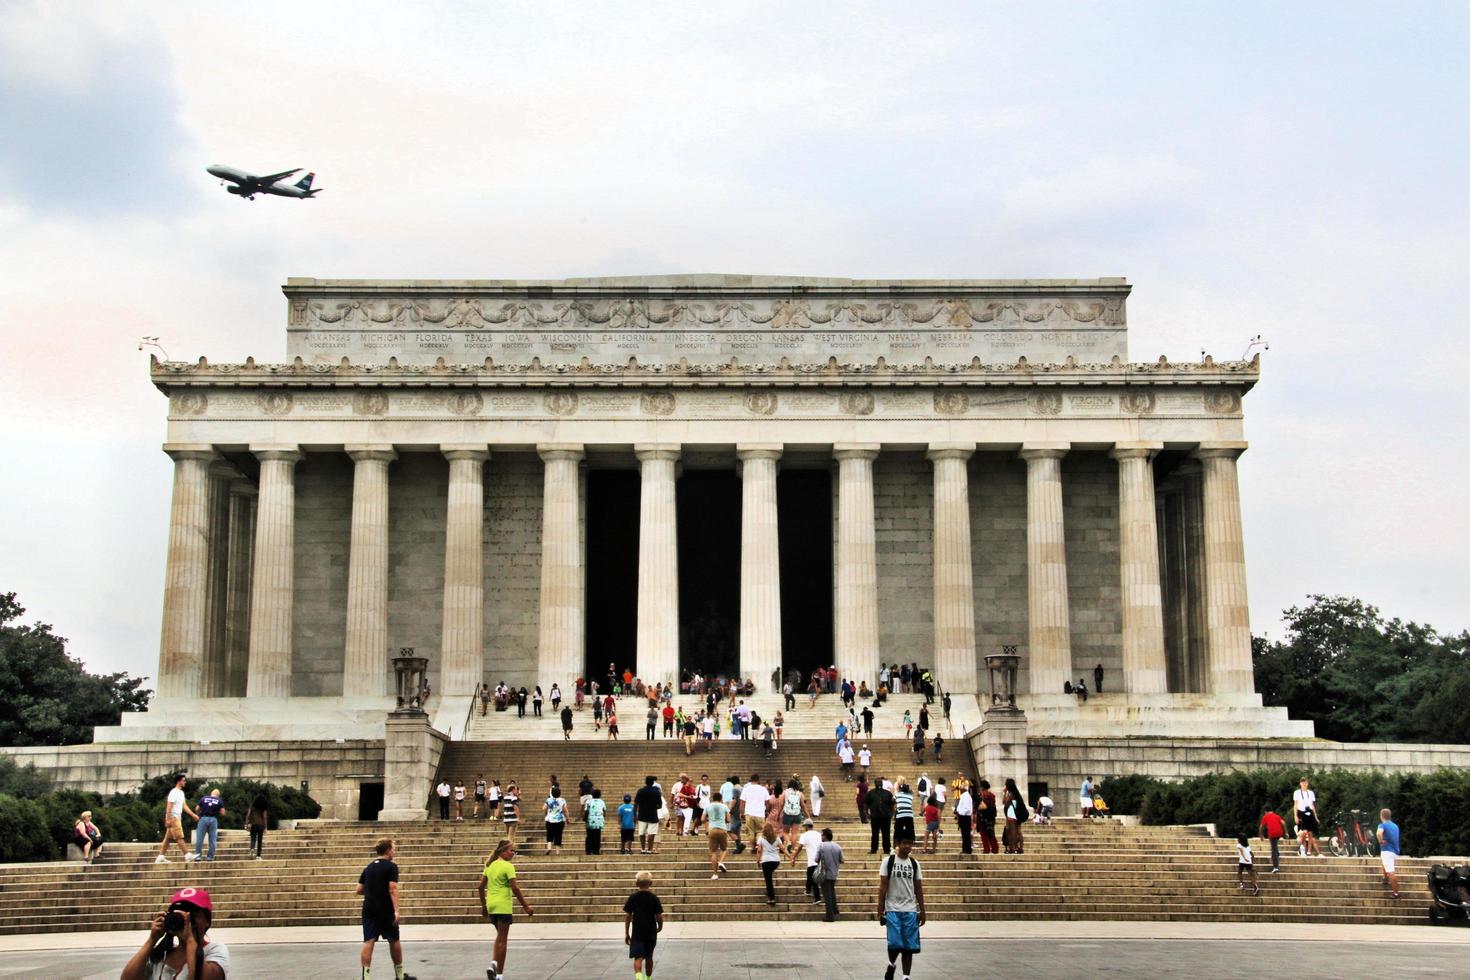 Washington in the USA in 2015. A view of the Lincoln Memorial photo